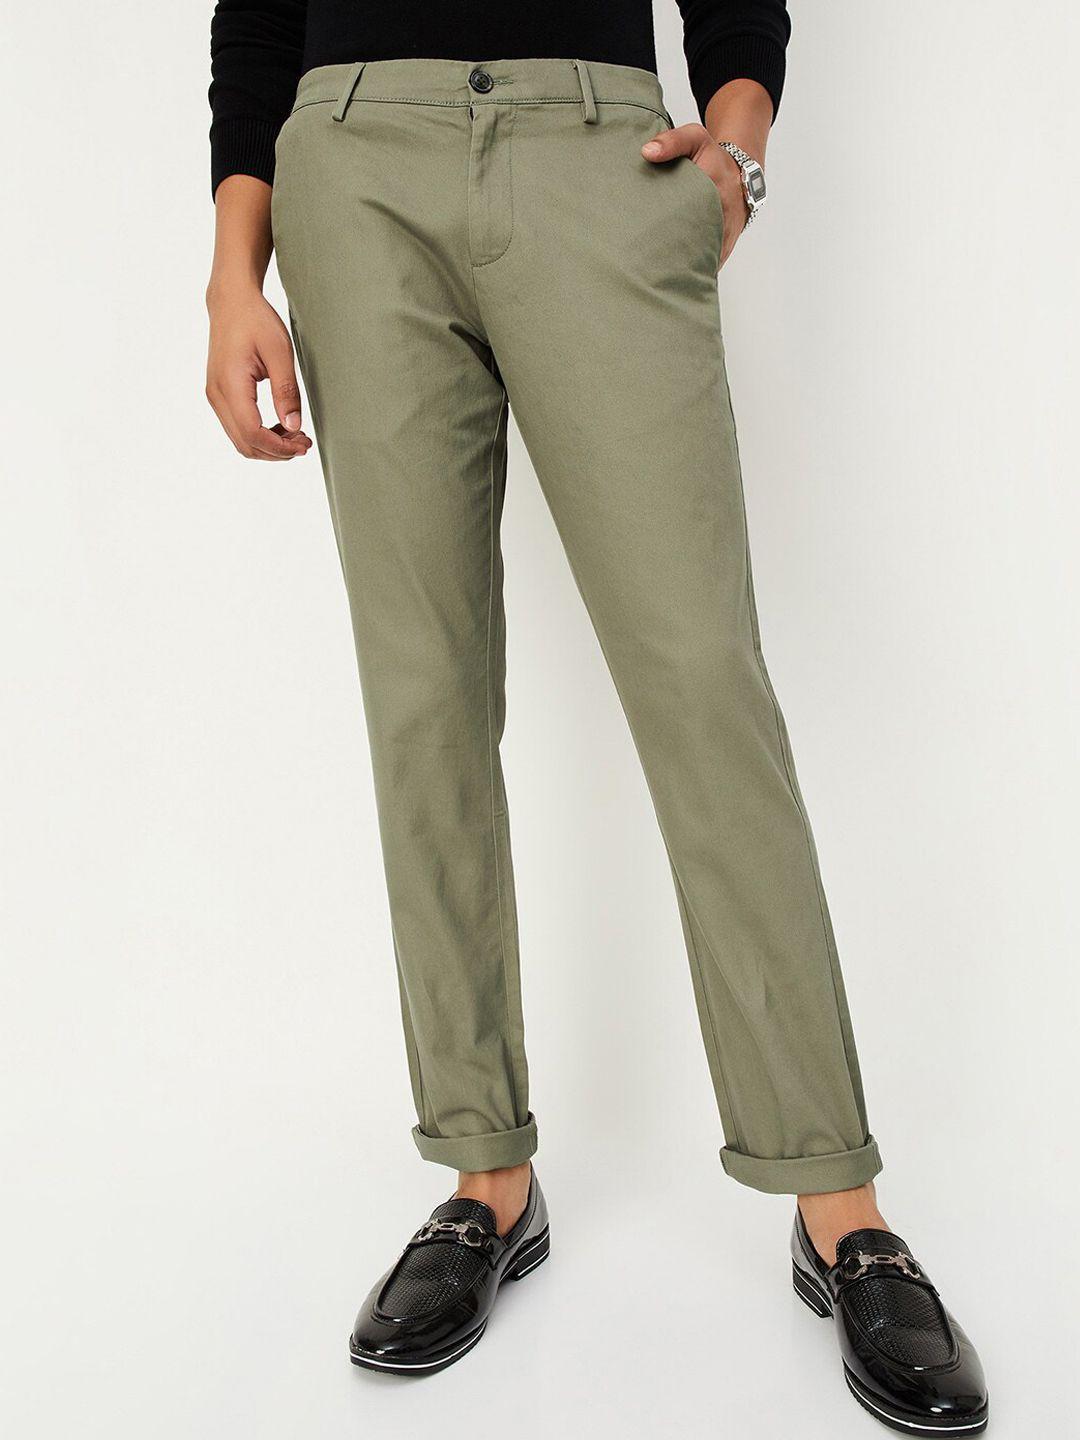 max men olive green trousers